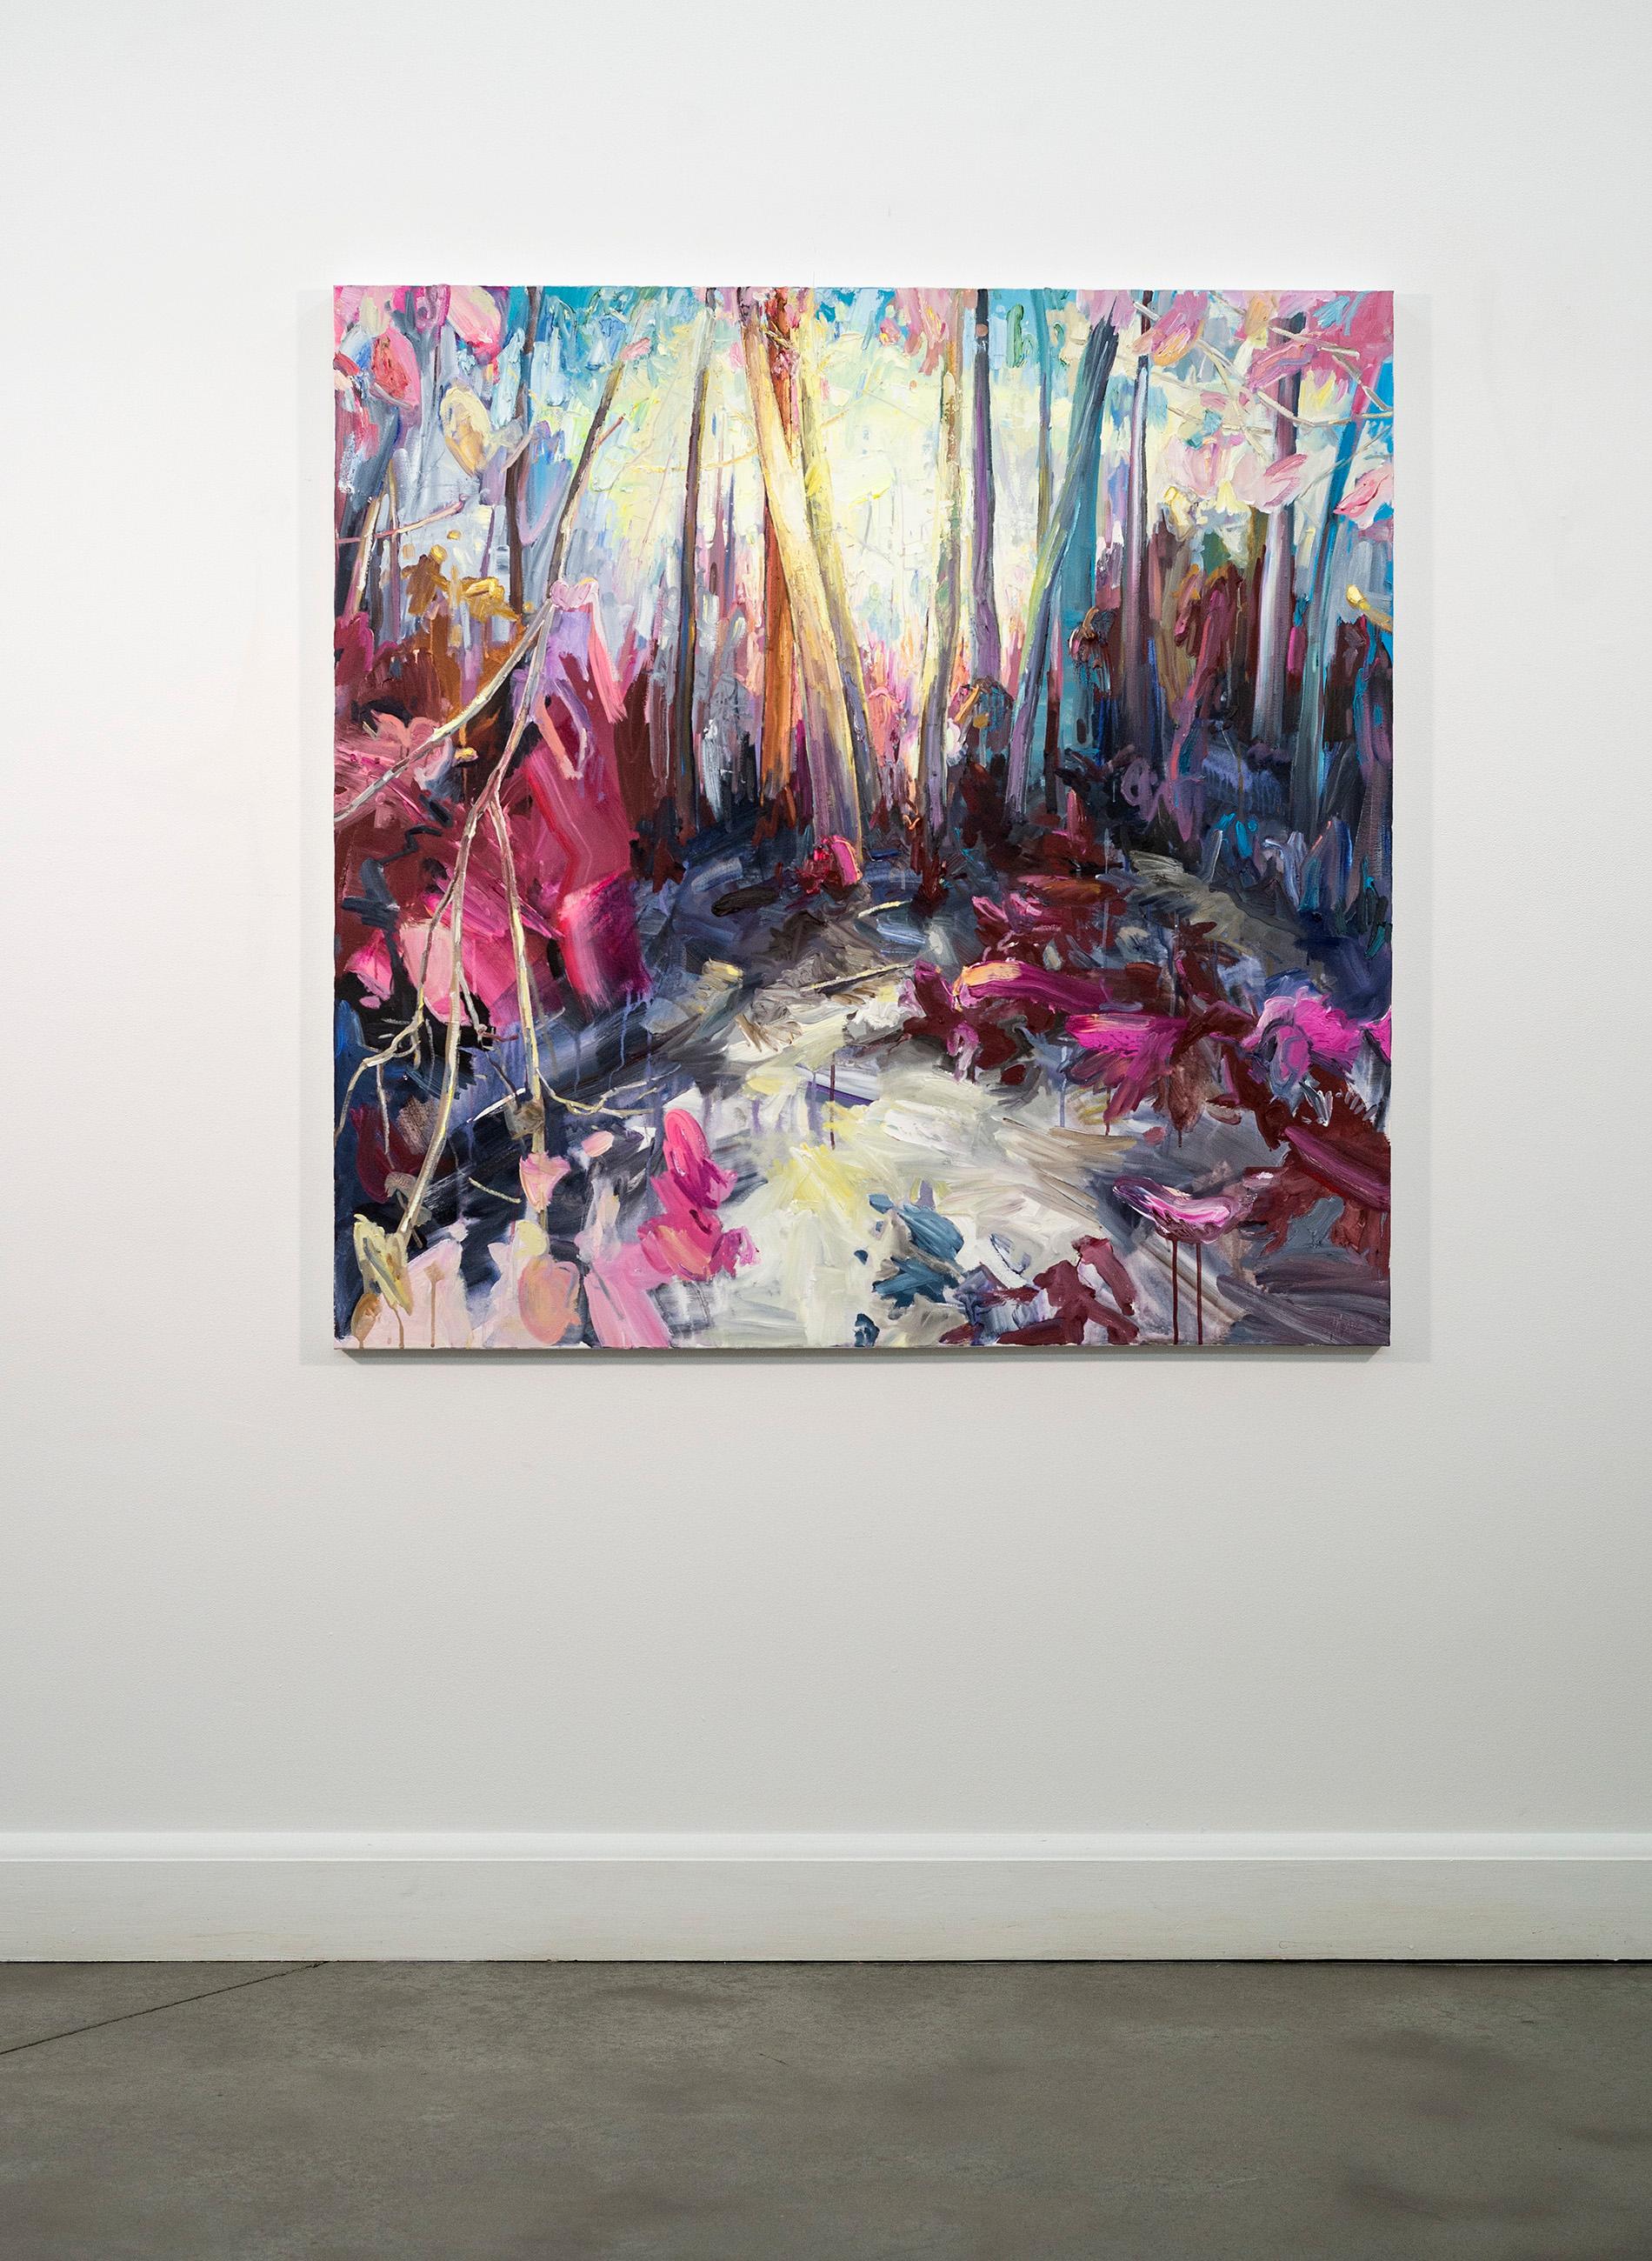 Toronto artist Julie Himel’s vividly colourful artwork offers a fresh and contemporary vision of ‘the landscape.’ Himel’s abstracts are often inspired by moments and memories of time spent in nature. This mixed media piece of a forest glade in